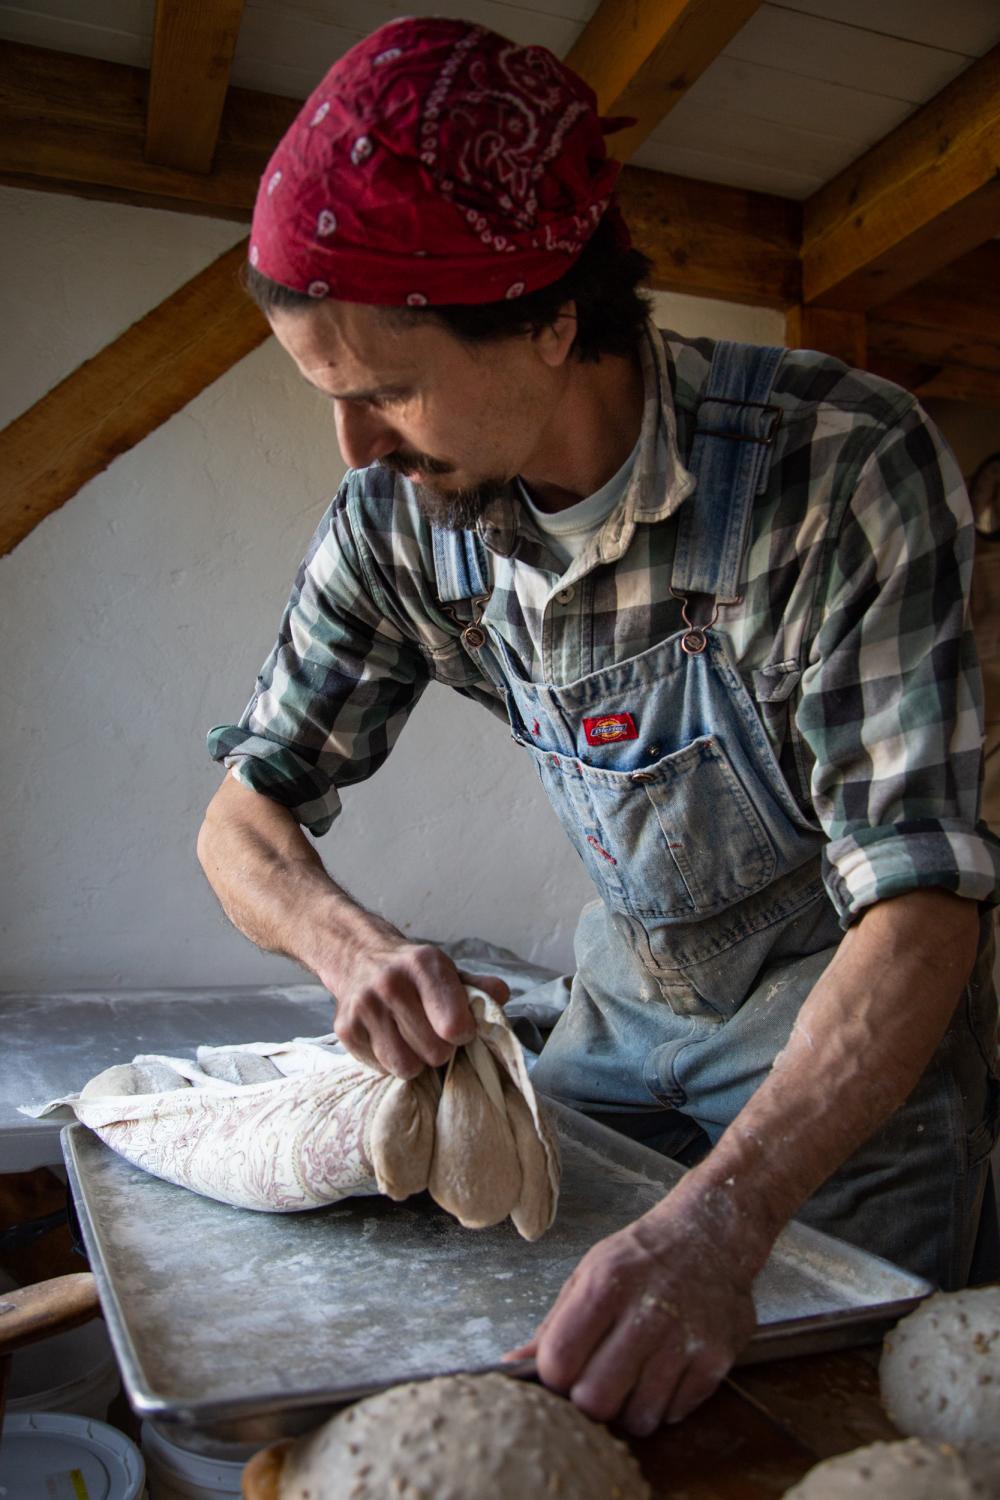 David makes bread by hand on Fridays for the Sunday market, Bremen, Maine, 2014.